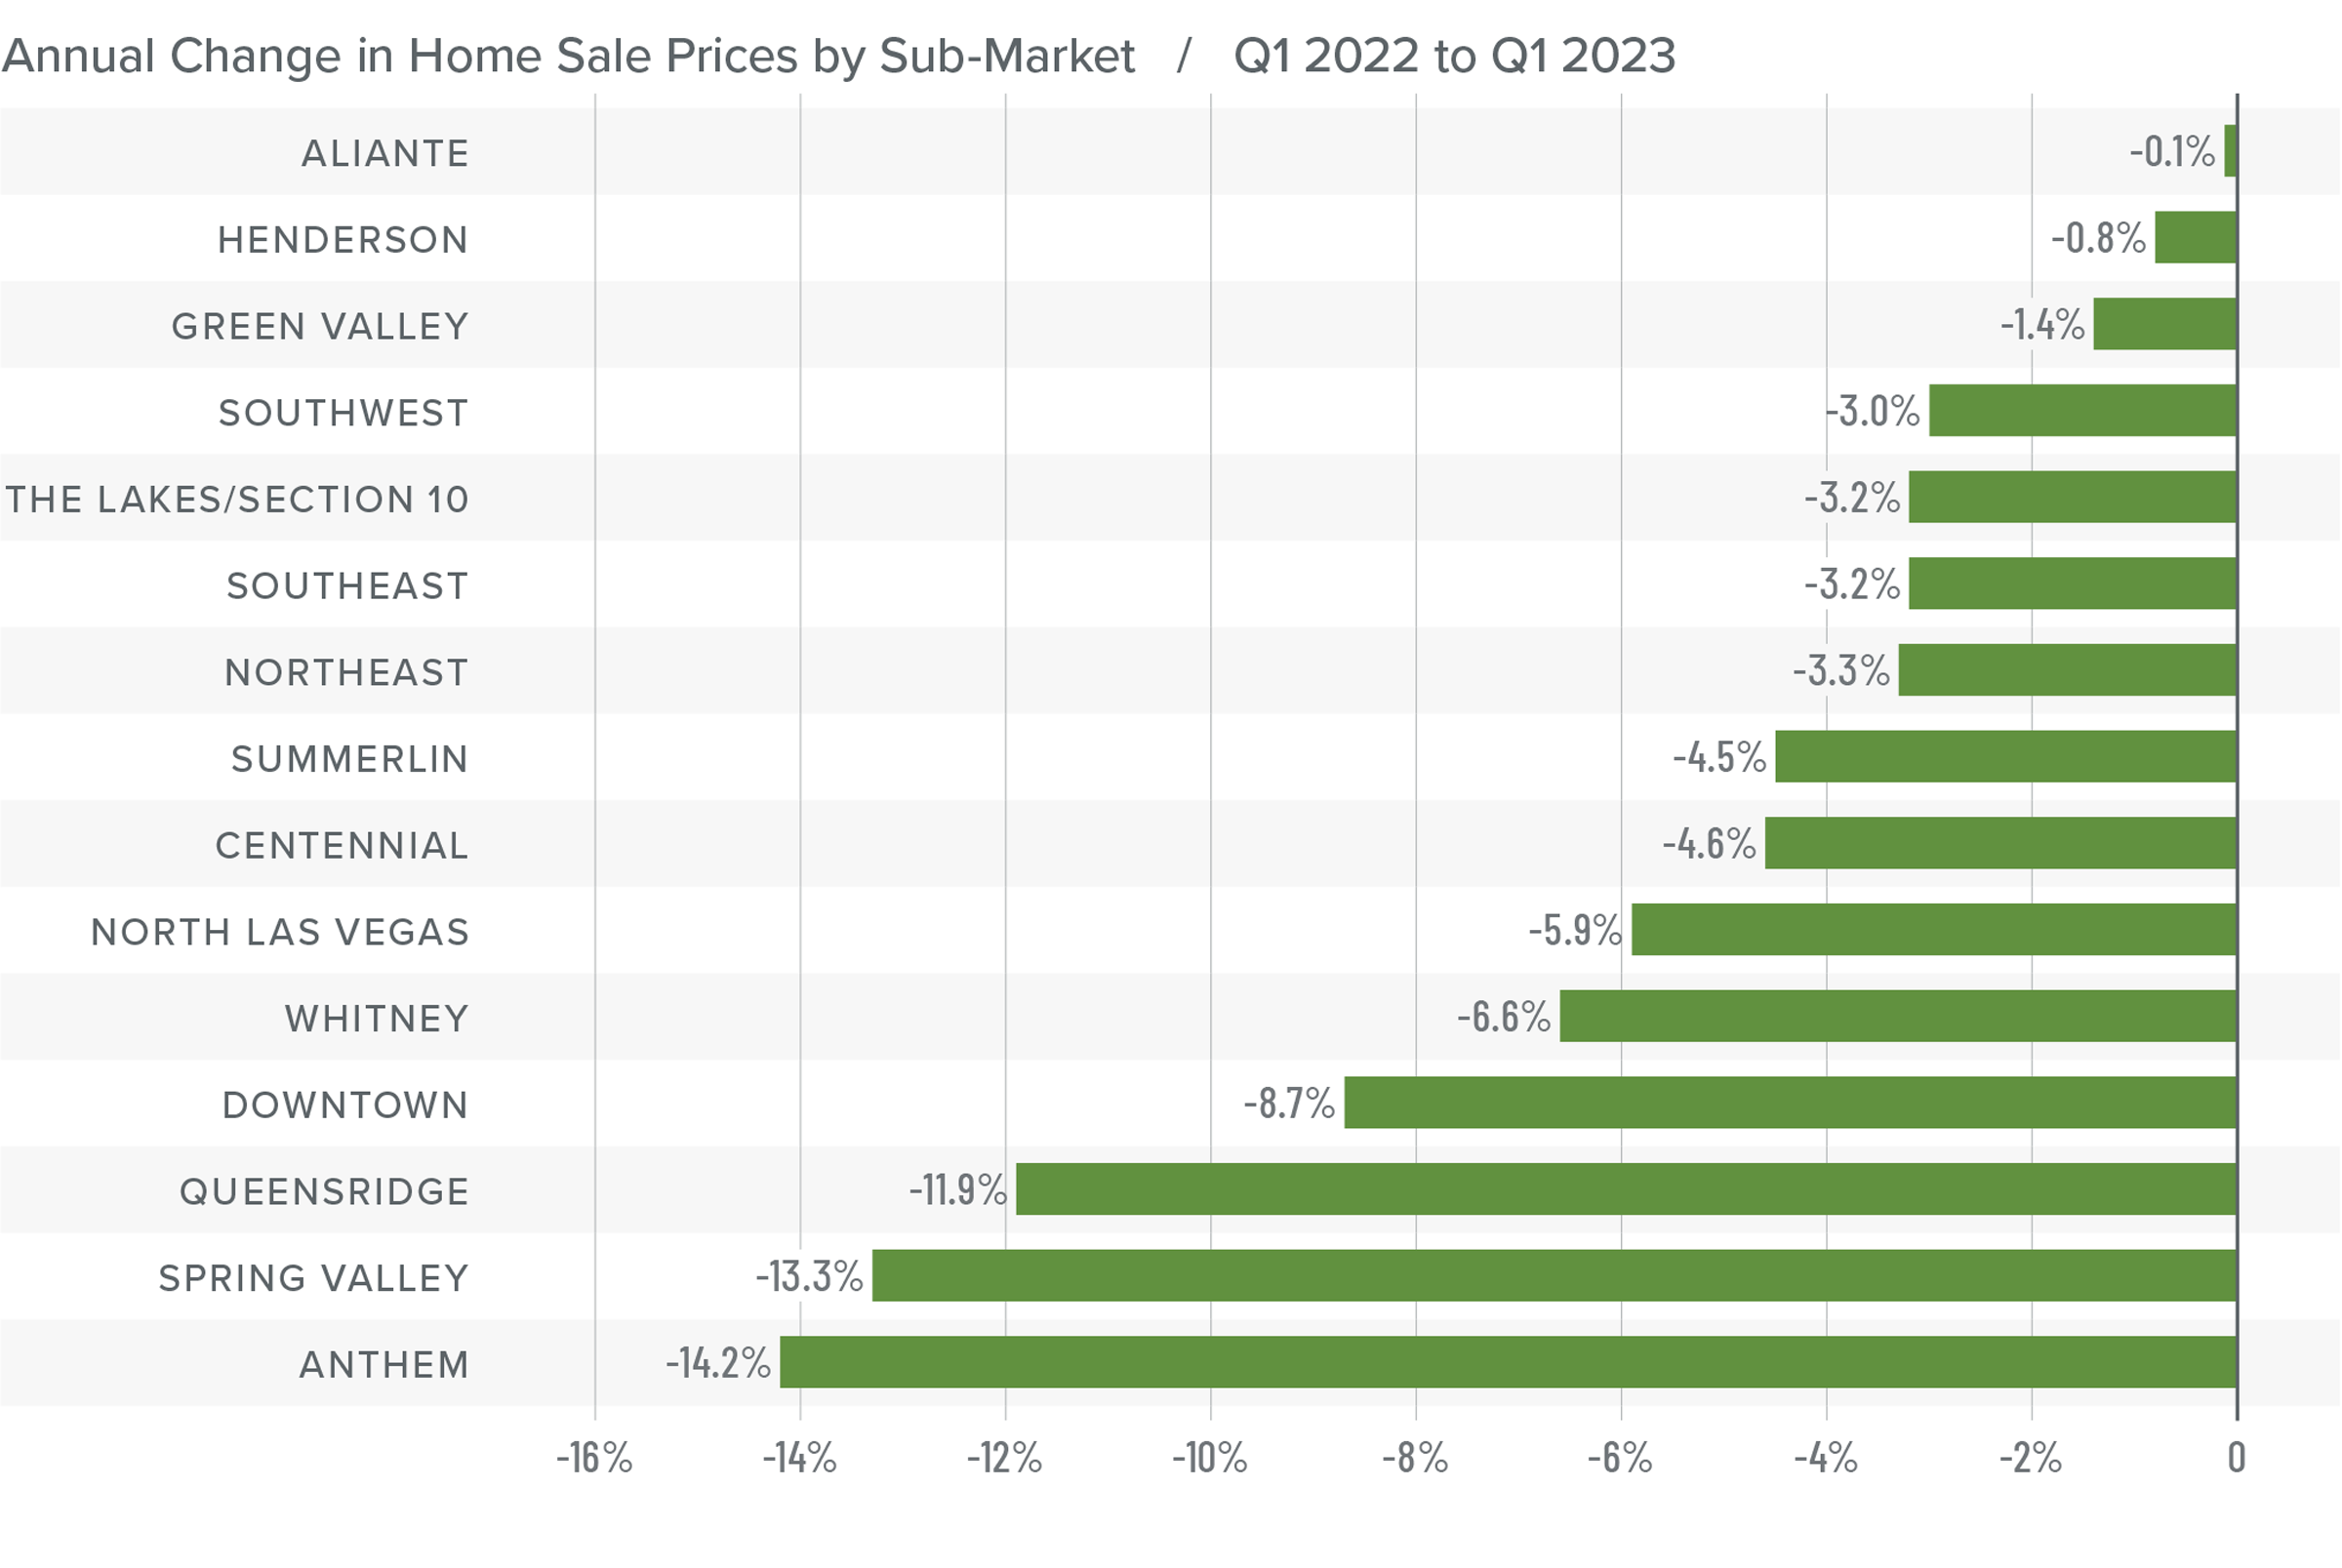 A bar graph showing the annual change in home sale prices for various sub-market areas in Nevada from Q1 2022 to Q1 2023. Aliante is at -0.1%, Henderson -0.8%, Green Valley -1.4%, Southwest -3%, The Lakes/Section 10 and Southeast -3.2%, Northeast -3.3%, Summerlin -4.5%, Centennial -4.6%, North Las Vegas -5.9%, Whitney -6.6%, Downtown -8.7%, Queensridge -11.9%, Spring Valley -13.3%, and Anthem -14.2%.